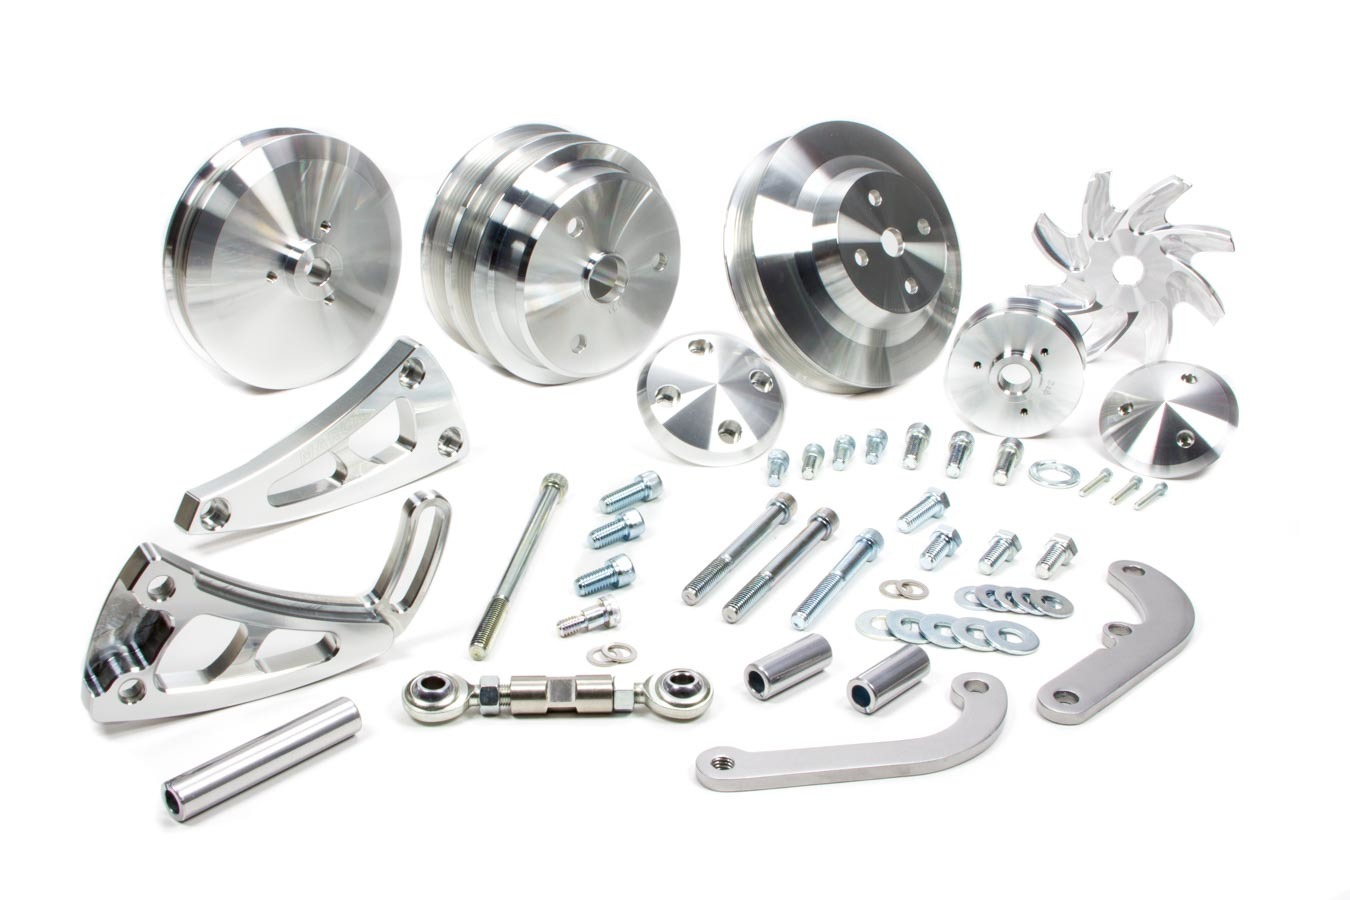 March Performance 22020 Pulley Kit, Ultra, Performance, 6-Rib Serpentine, Aluminum, Clear Powder Coat, Long Water Pump, Small Block Chevy, Kit